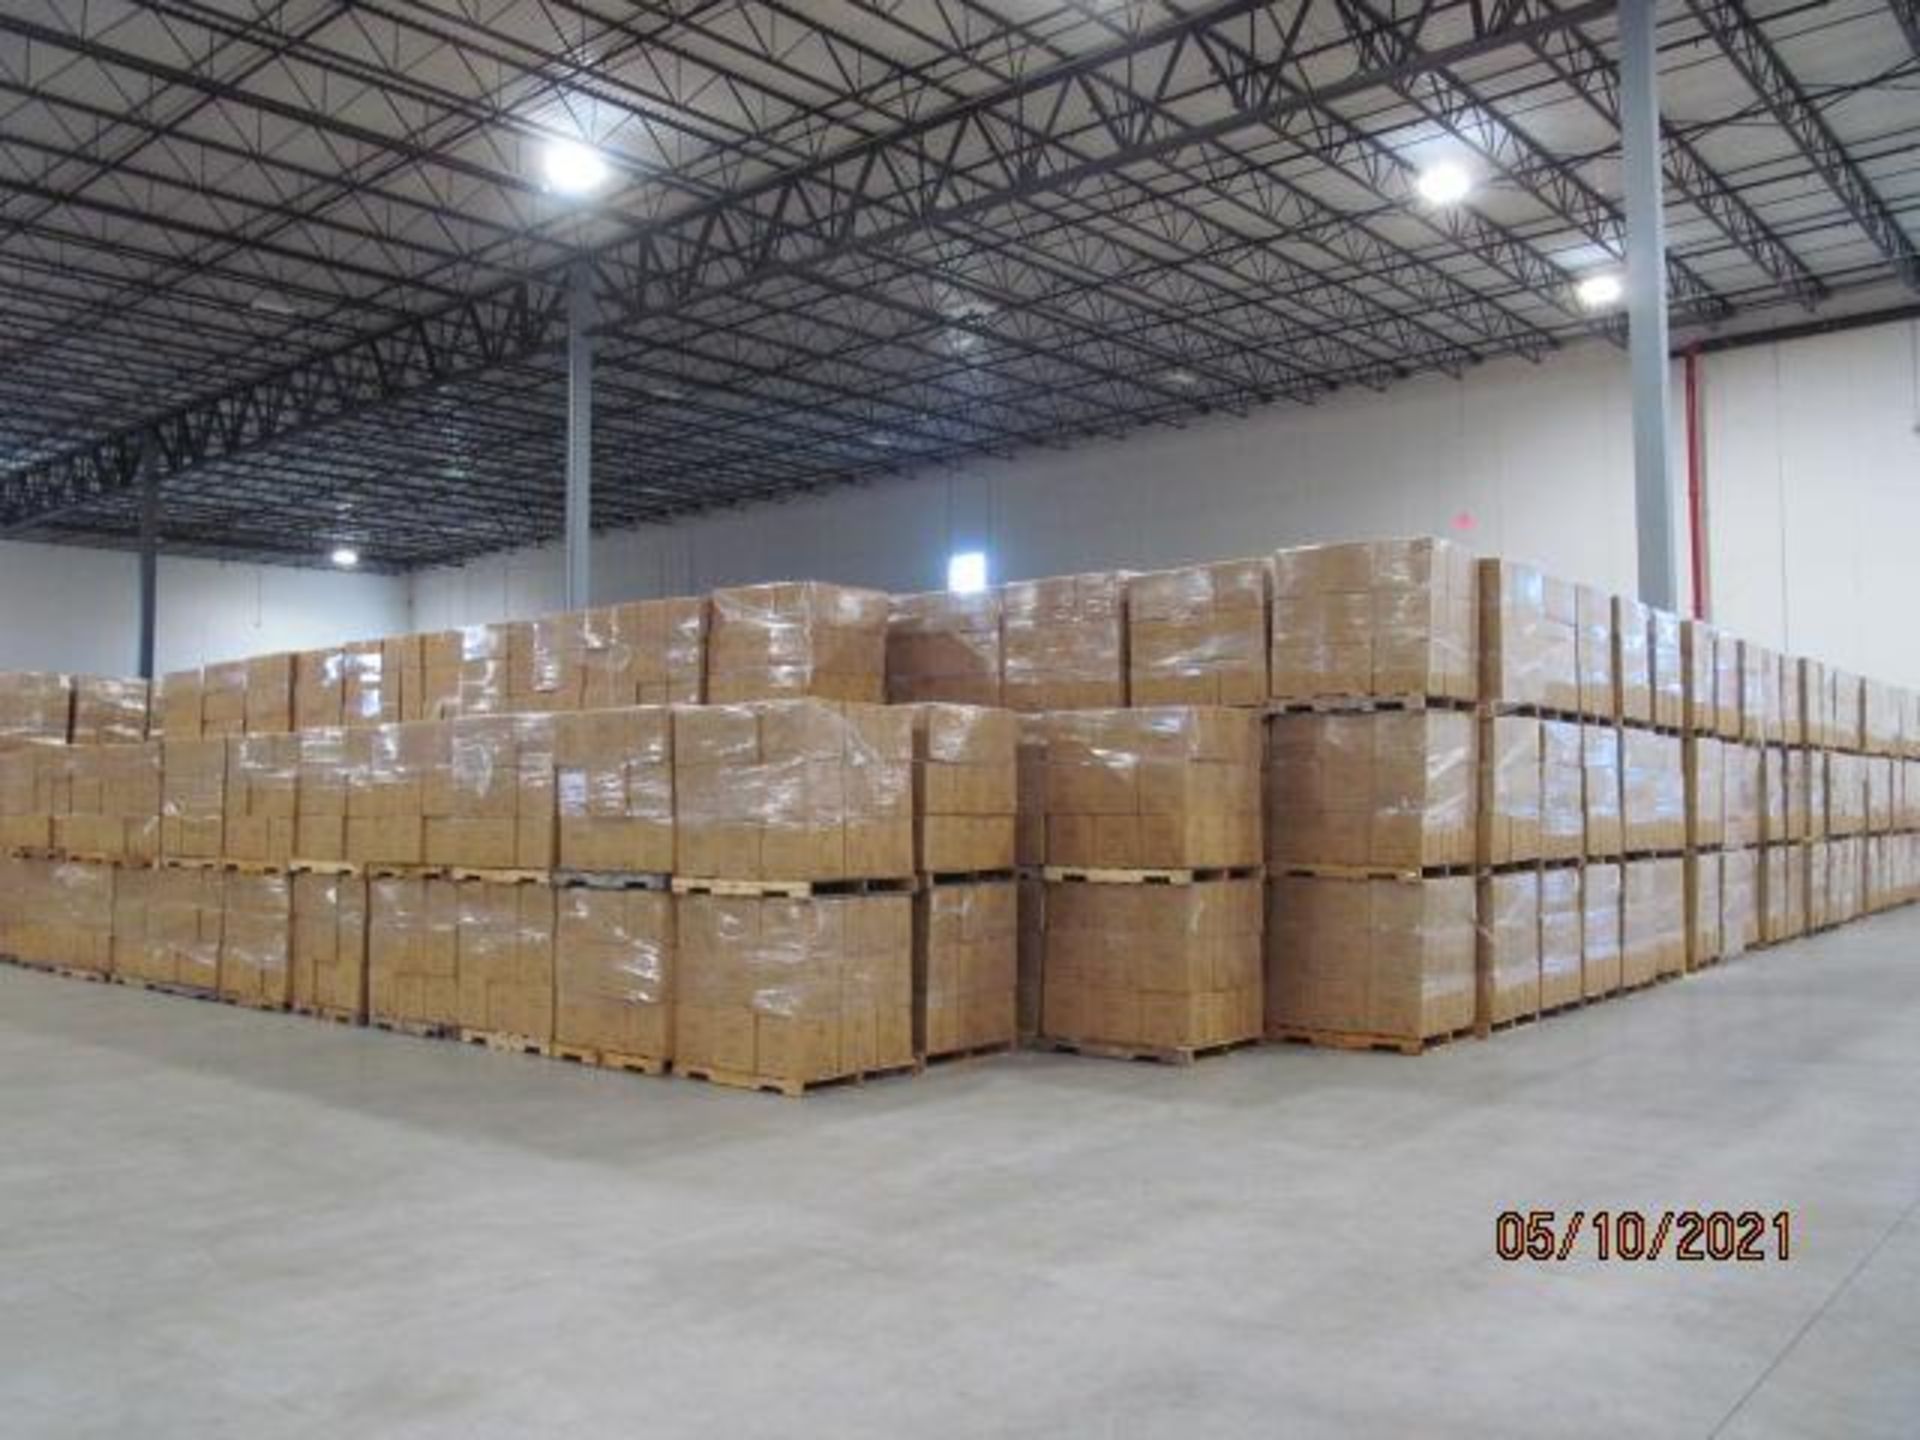 Lot of Waxman Kleen Freak Sanitizing Wipes consisting of 3,240 packages on 5 pallets. Each package c - Image 11 of 11